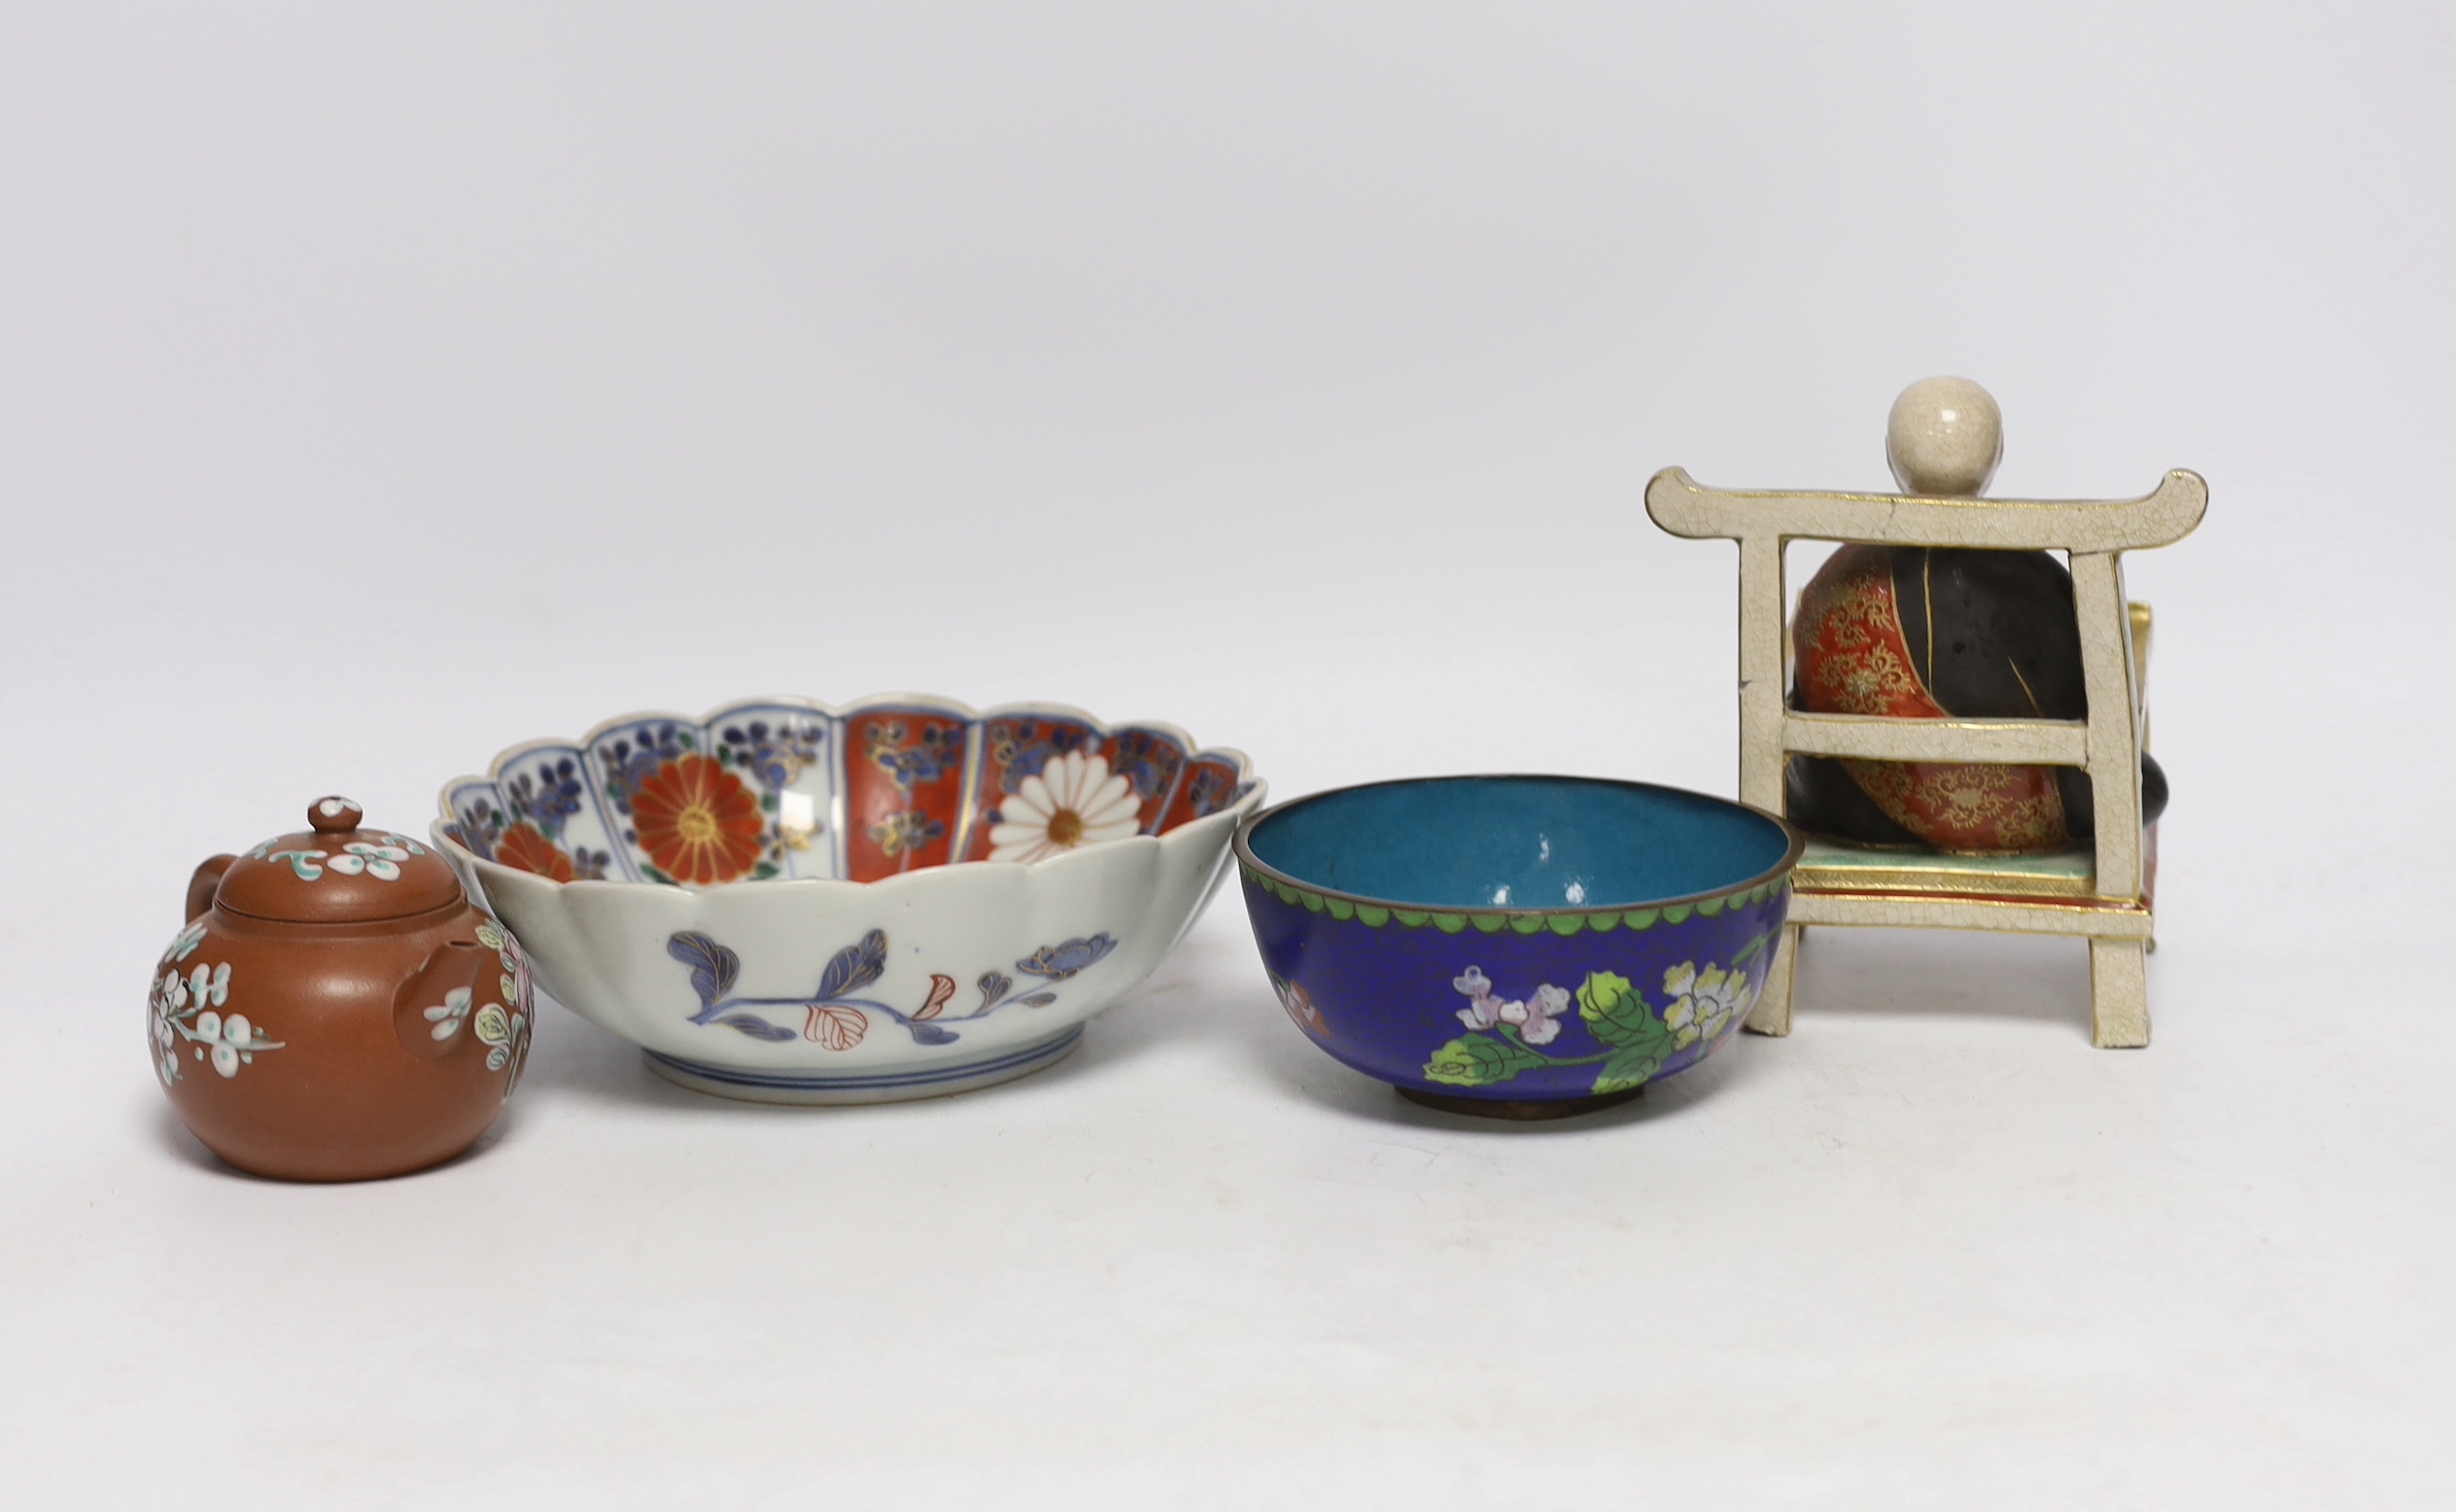 A Chinese enamelled yixing teapot and cloisonné bowl together with a Japanese Imari bowl and a Satsuma seated figure of a Buddhist monk, tallest 14cm